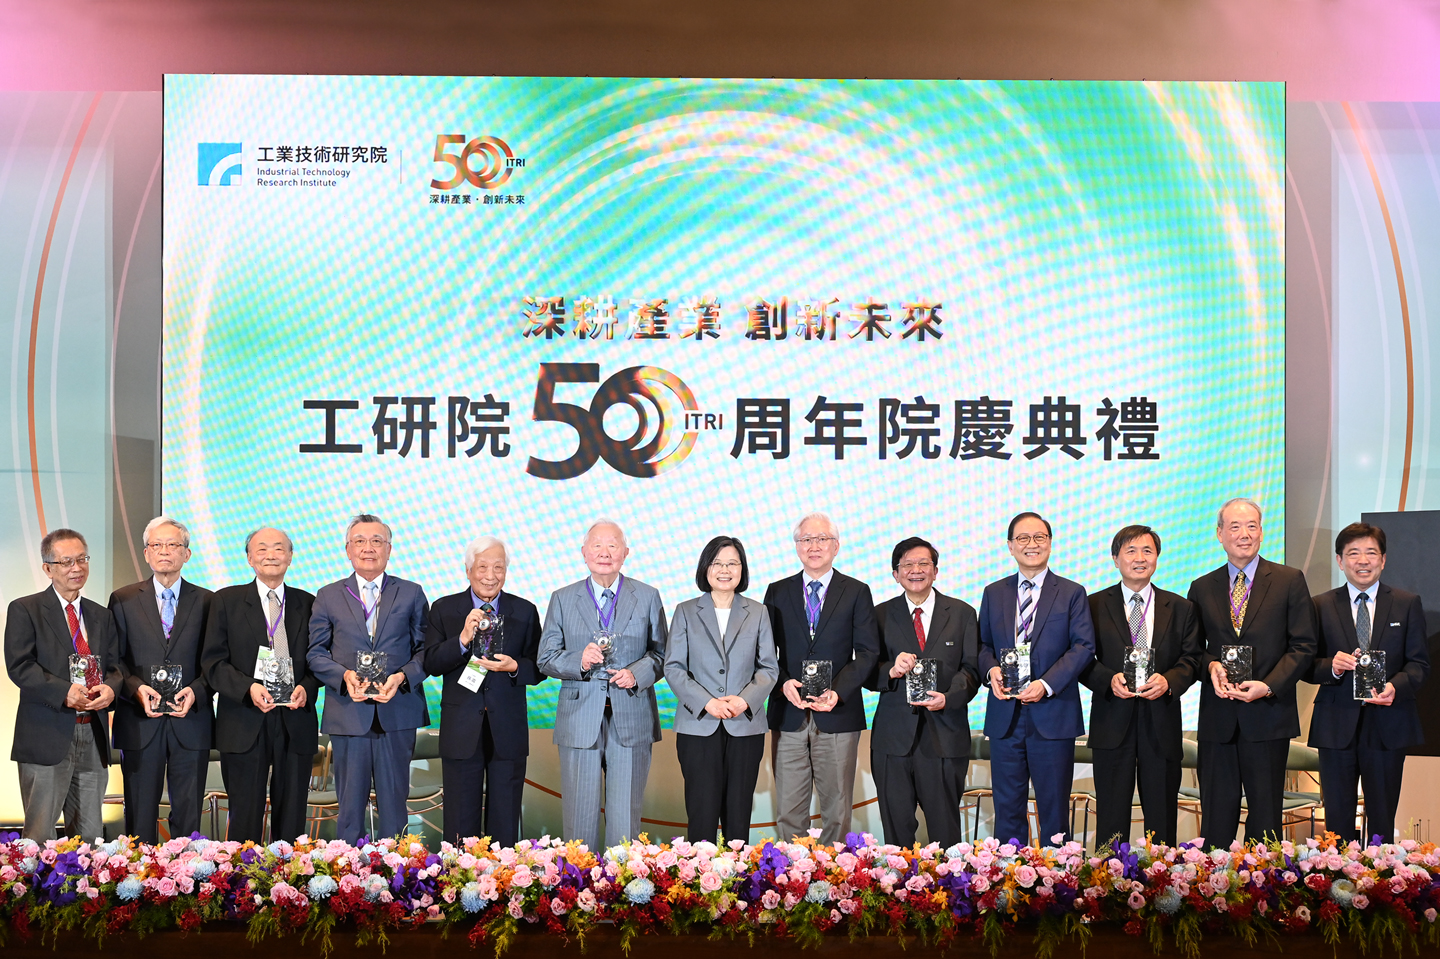 ITRI Celebrates Golden Jubilee: 50 Years of Empowering Industry through Innovations